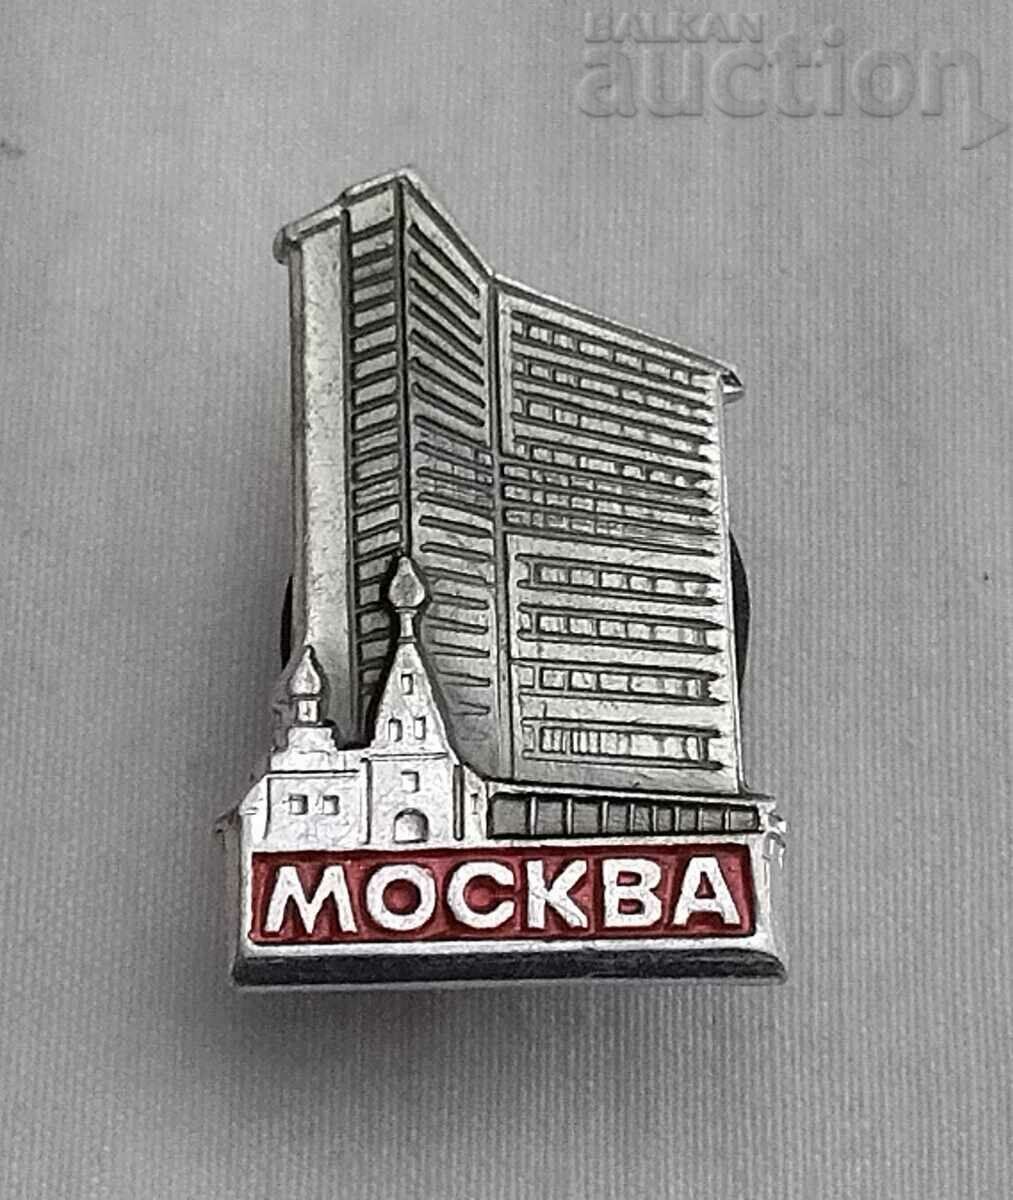 MOSCOW BUILDING OF GRAY RUSSIA BADGE